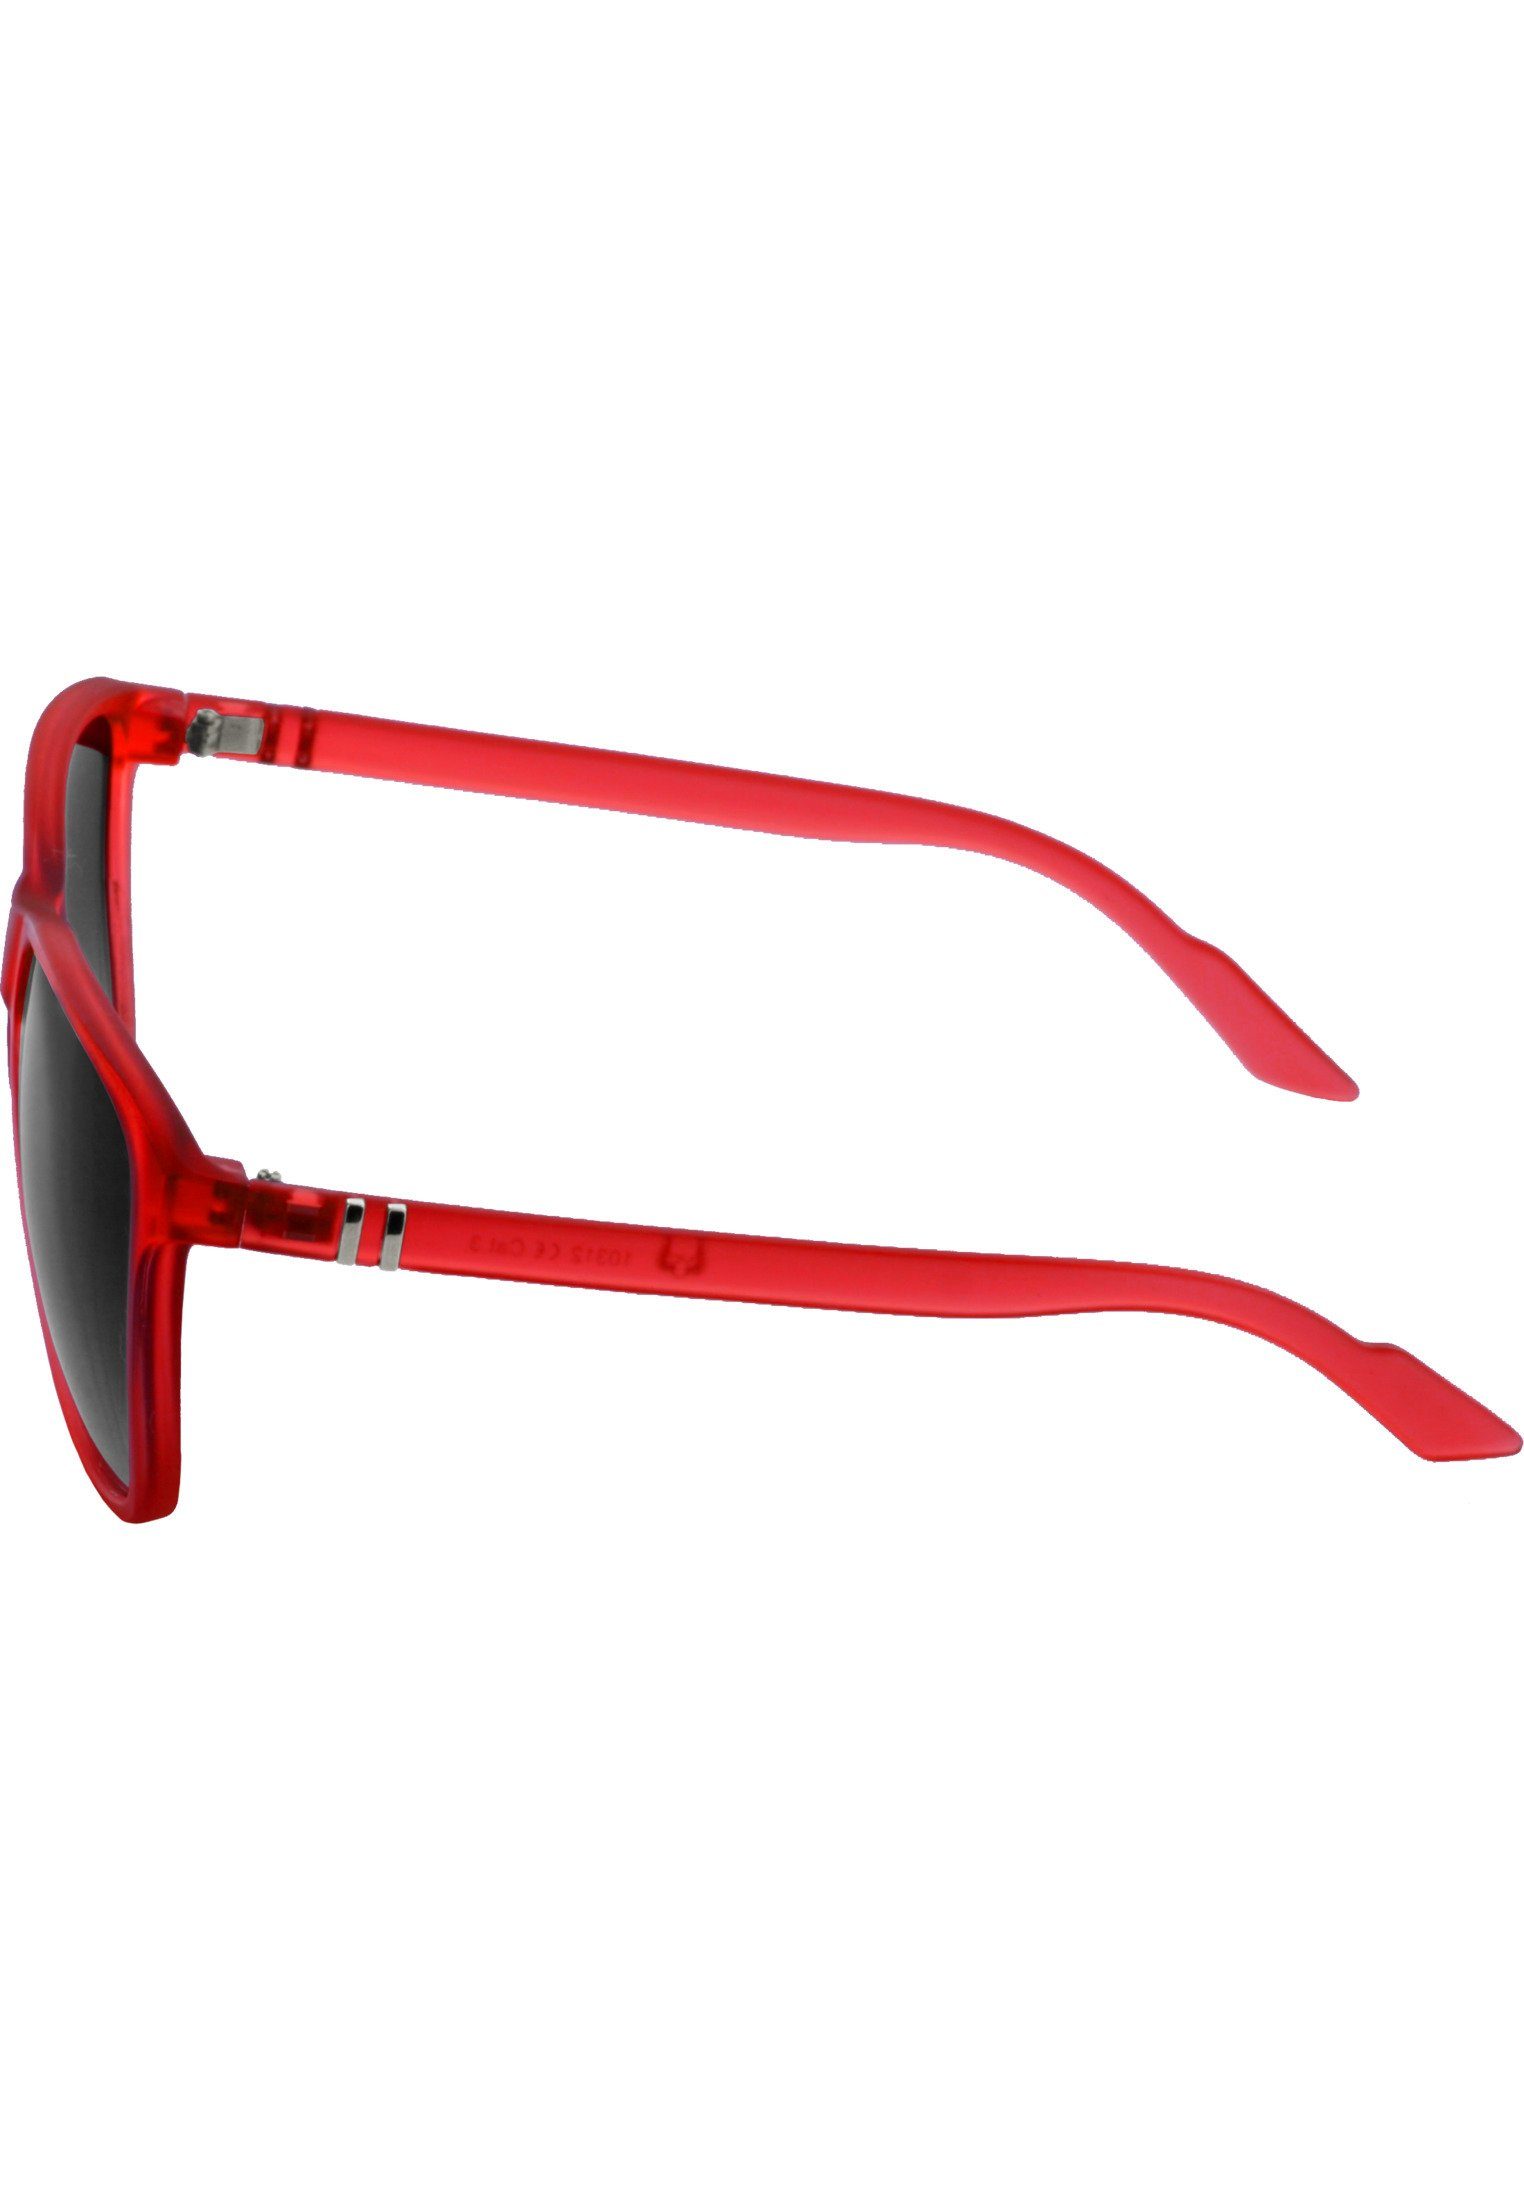 MSTRDS Sonnenbrille Sunglasses red Chirwa Accessoires